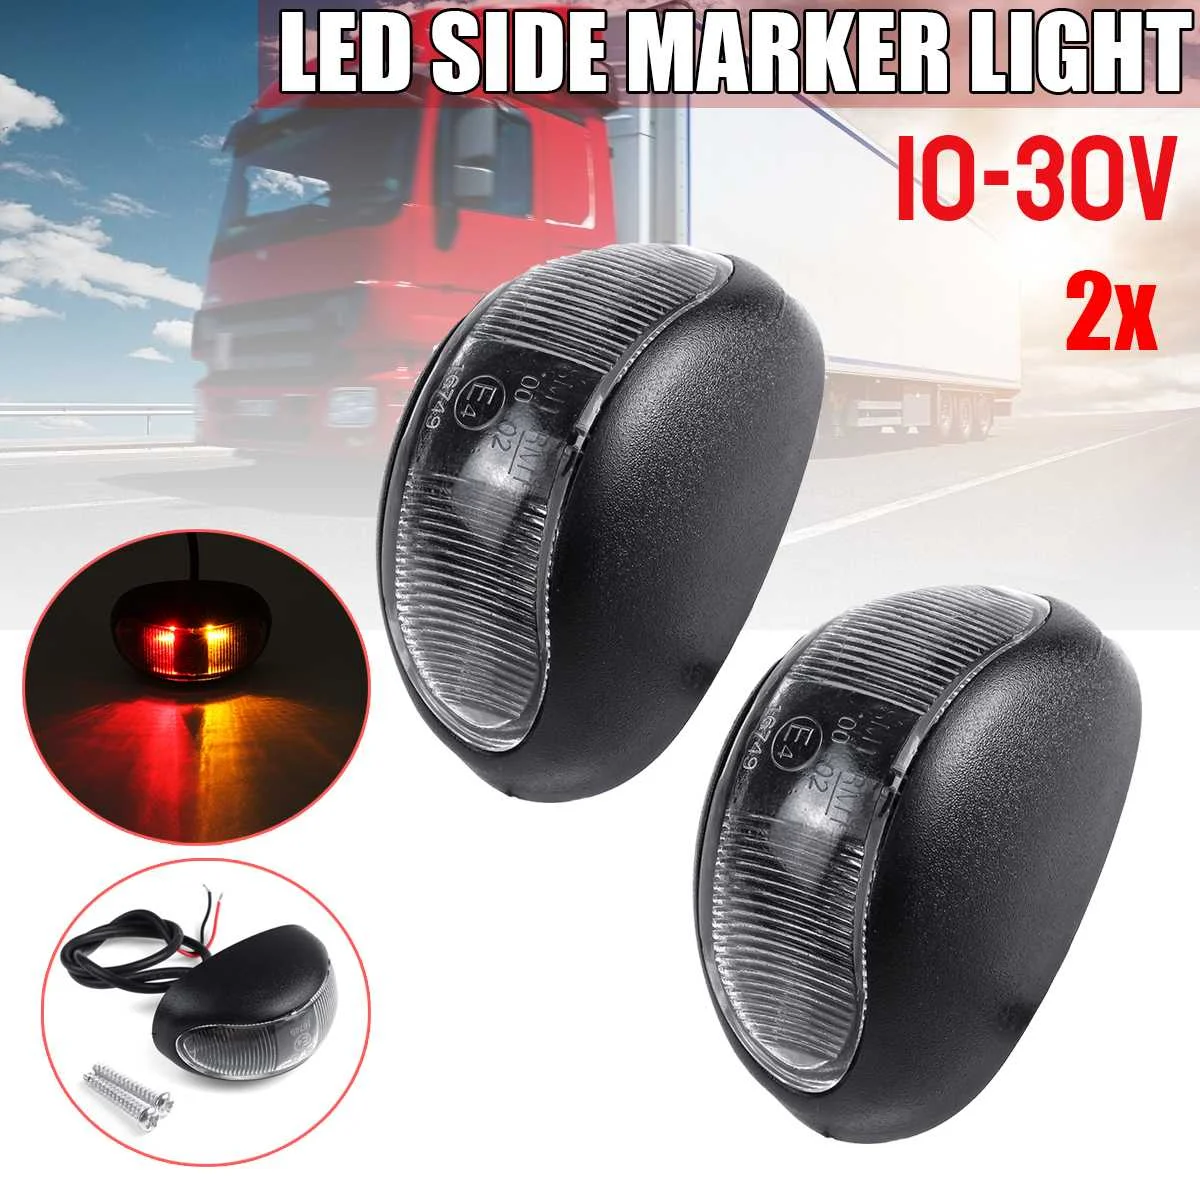 

2pcs 10-30V LED Car Truck Side Marker Light Turn Signal Indicator Light Clearance Lamp Taillight for Trailer Lorry Bus Pick Up